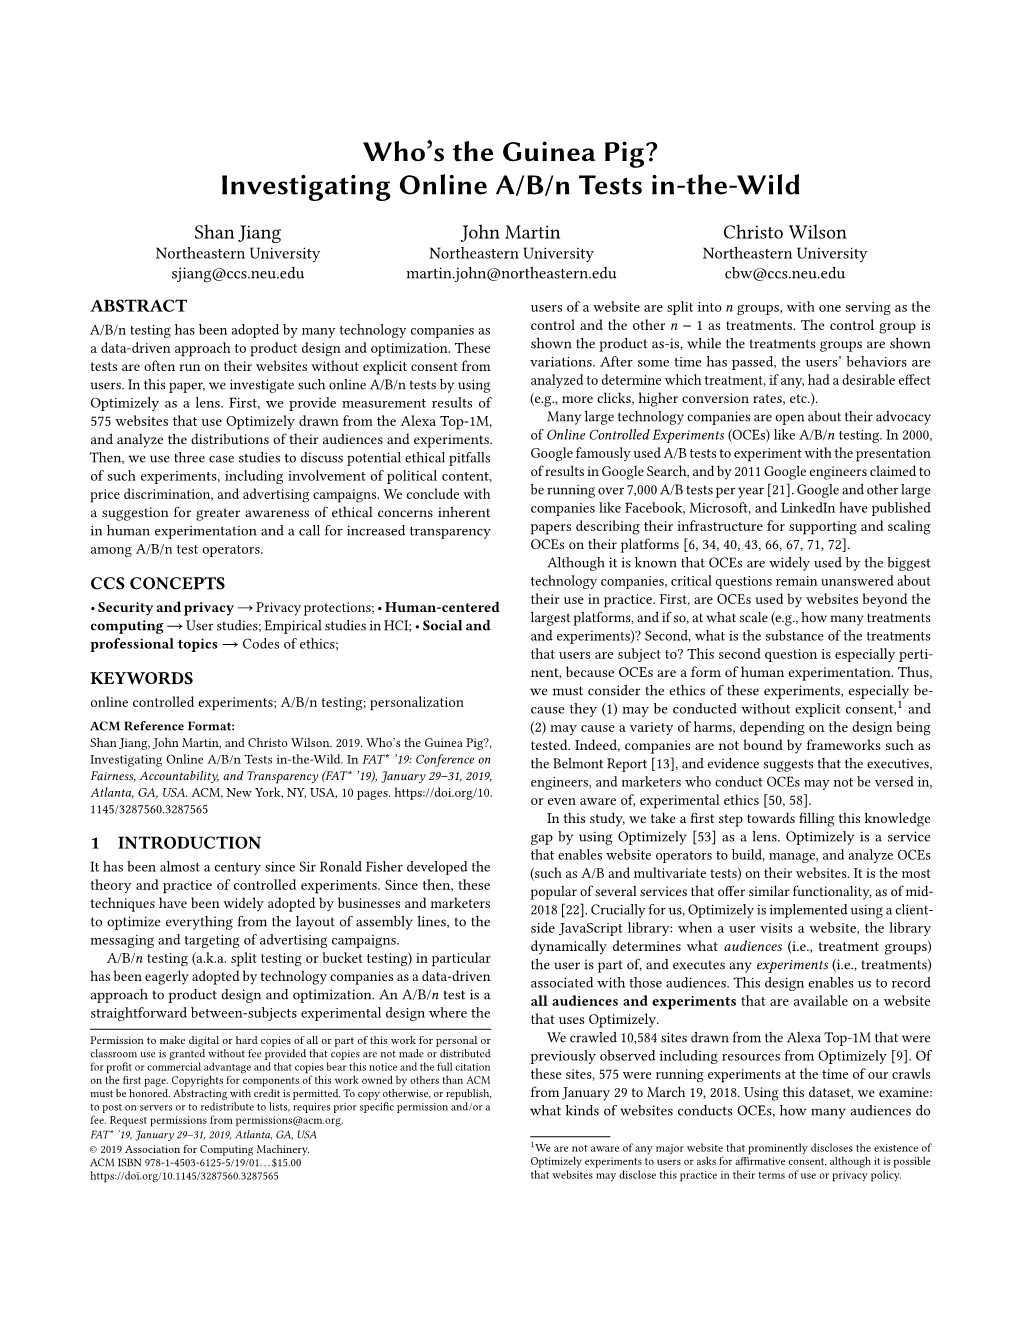 Who's the Guinea Pig? Investigating Online A/B/N Tests In-The-Wild